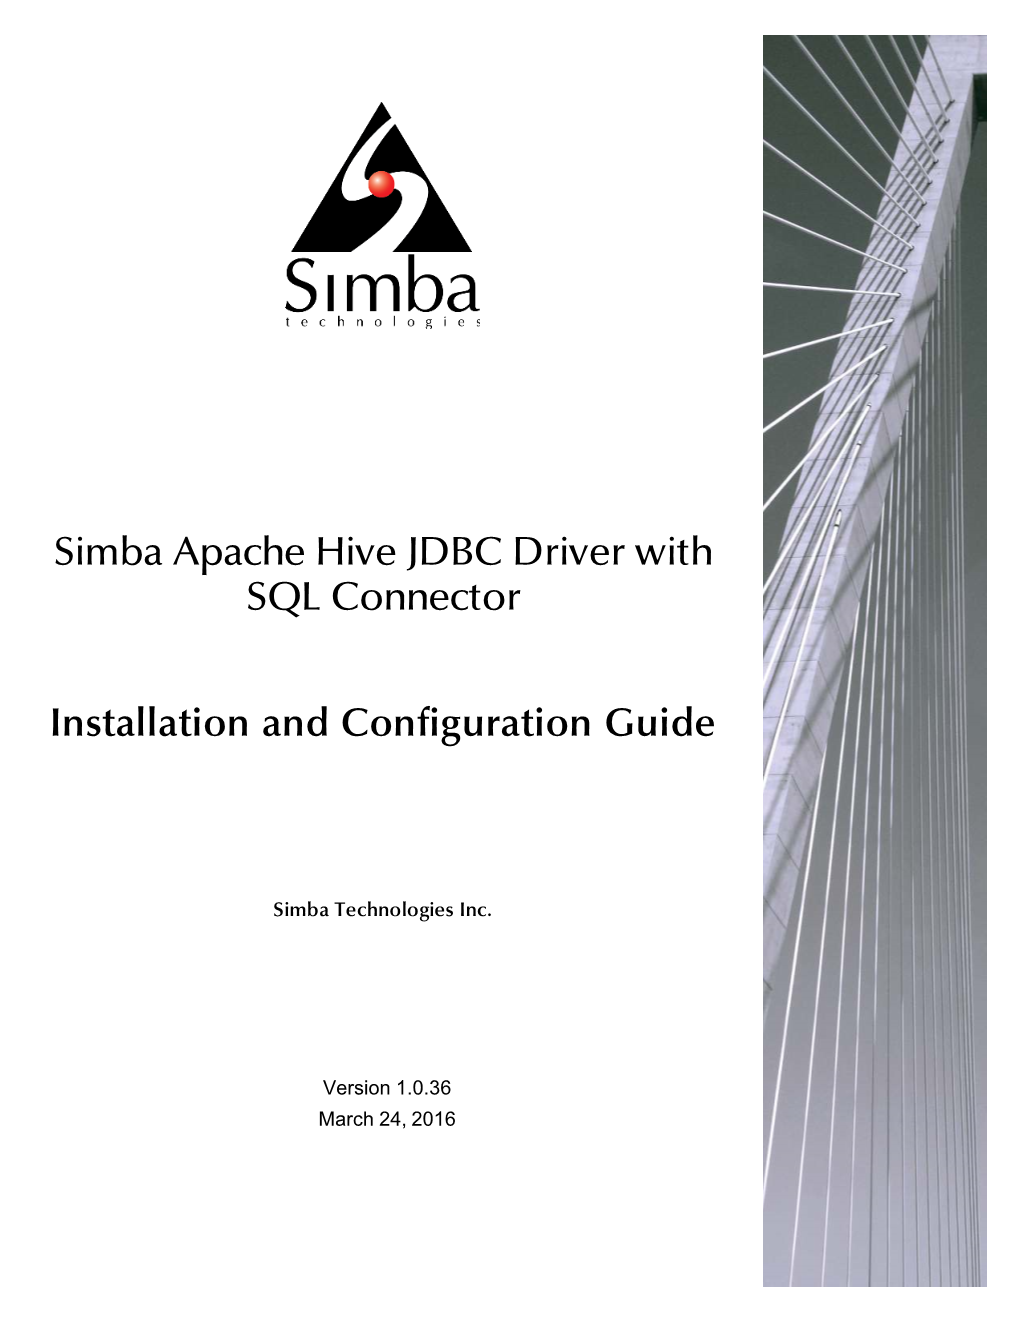 Simba Apache Hive JDBC Driver with SQL Connector Installation and Configuration Guide